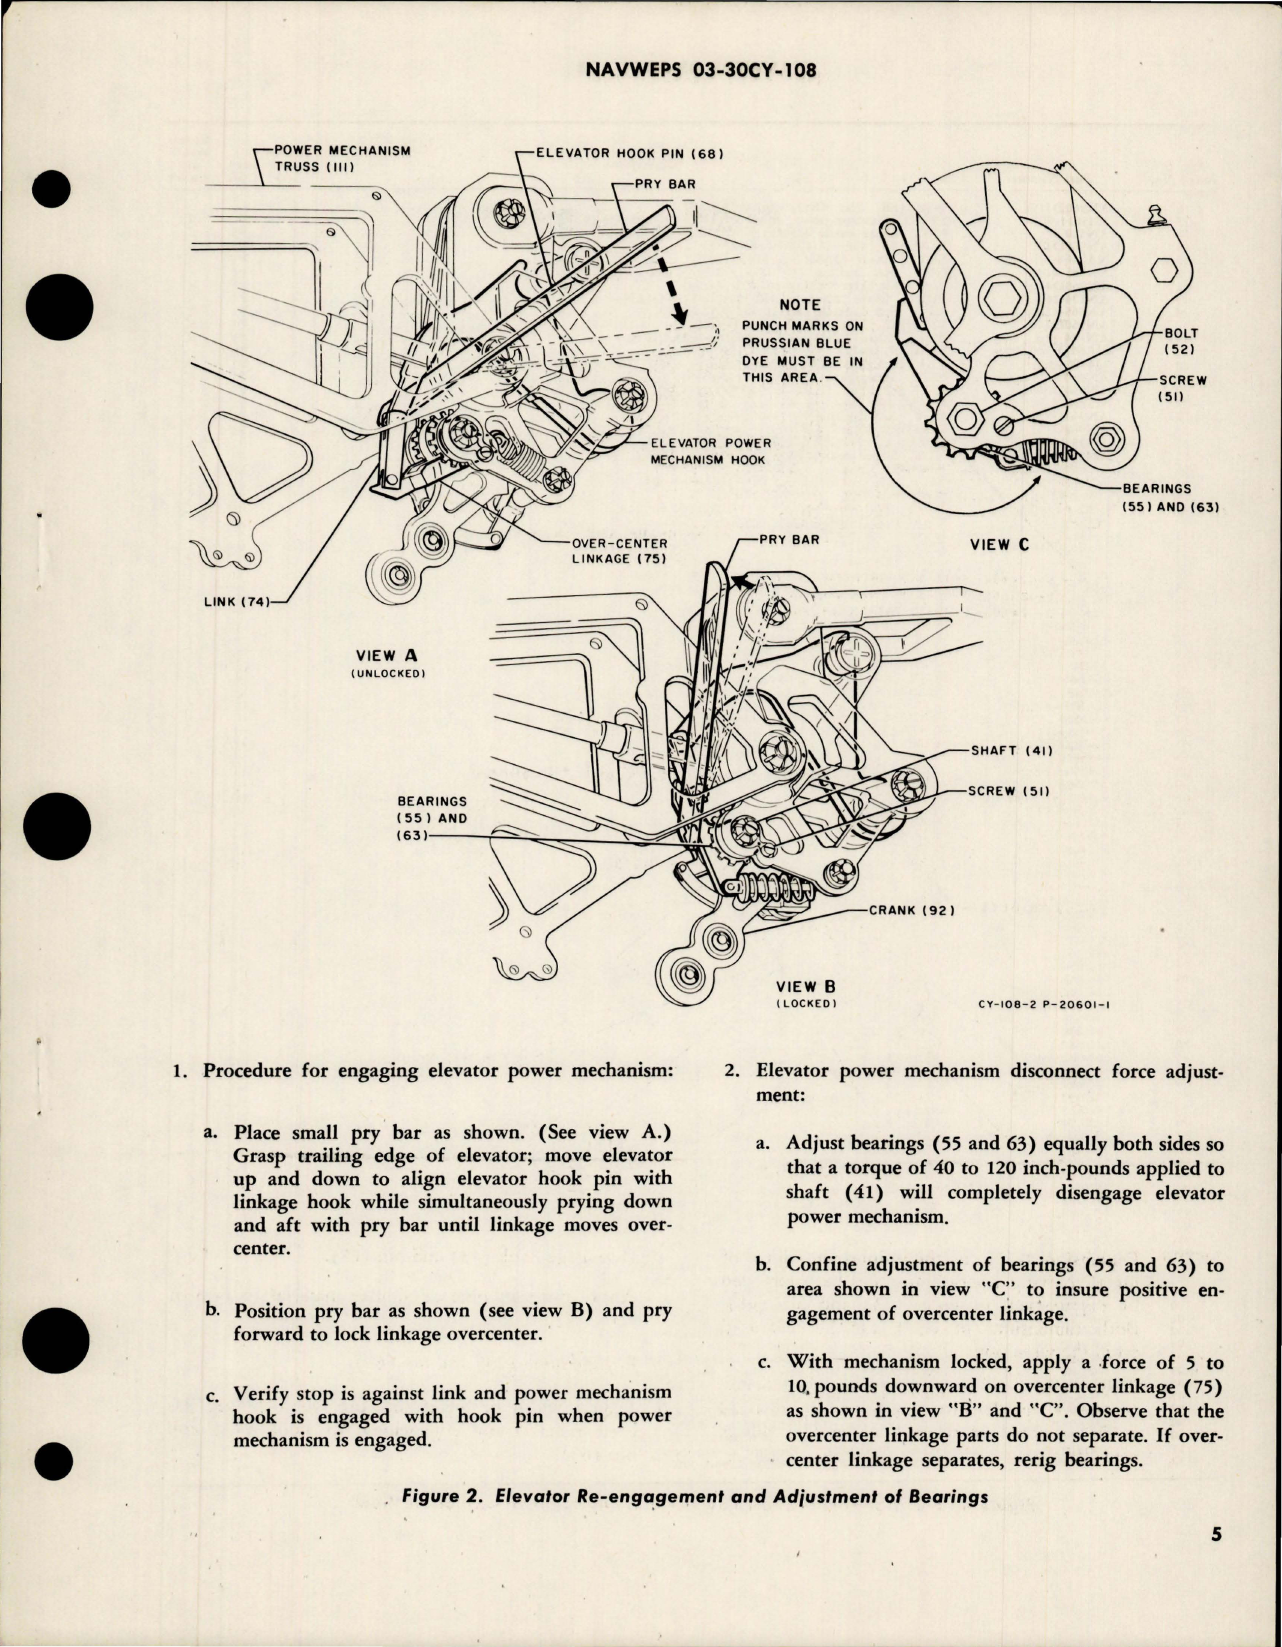 Sample page 5 from AirCorps Library document: Overhaul Instructions with Parts Breakdown for Mechanism Assembly Elevator Power Boost - 5445823-3